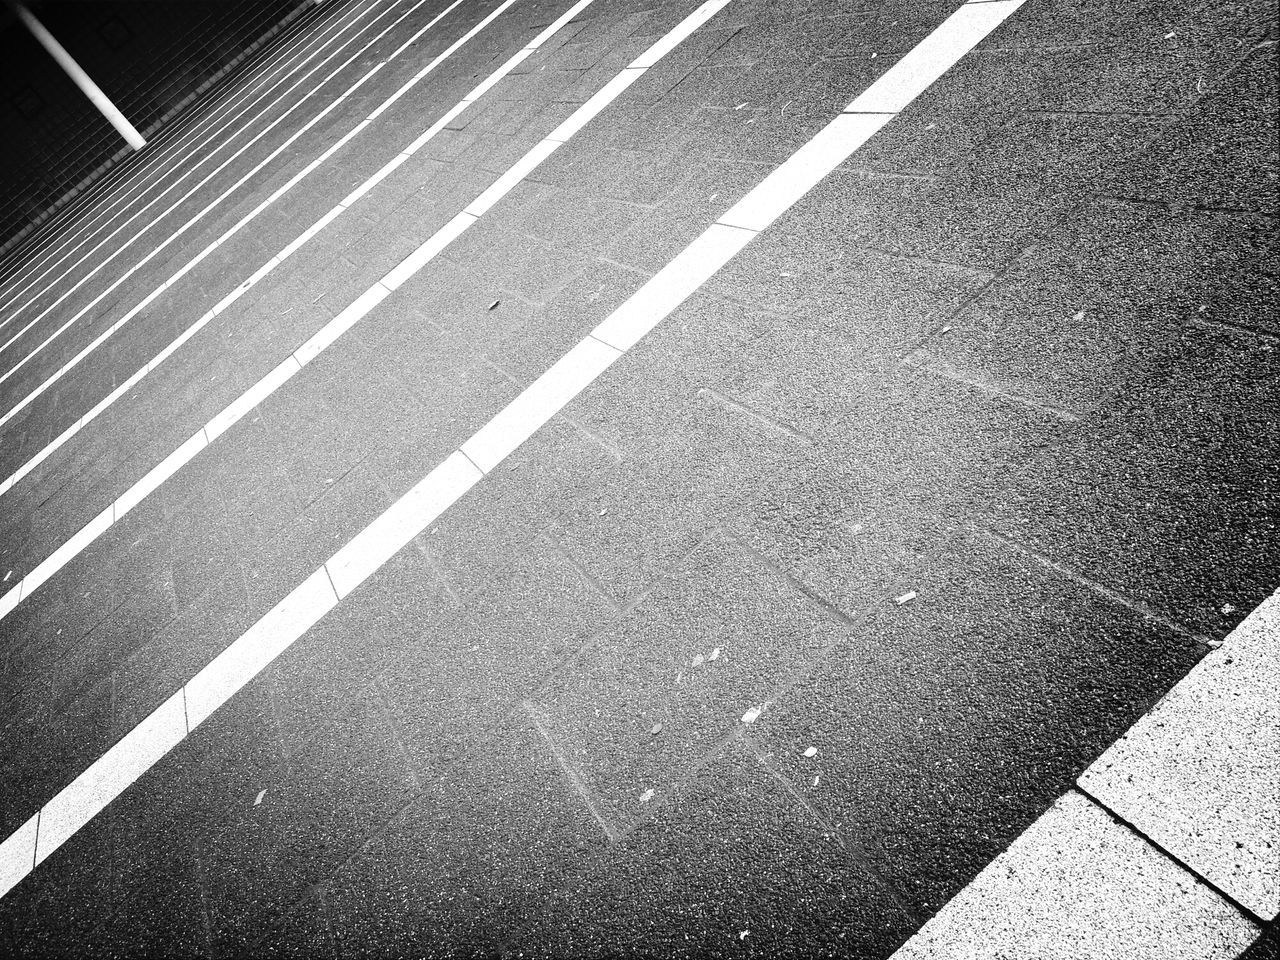 road marking, street, asphalt, transportation, road, high angle view, zebra crossing, the way forward, outdoors, full frame, sidewalk, day, pattern, no people, textured, sunlight, guidance, backgrounds, shadow, direction